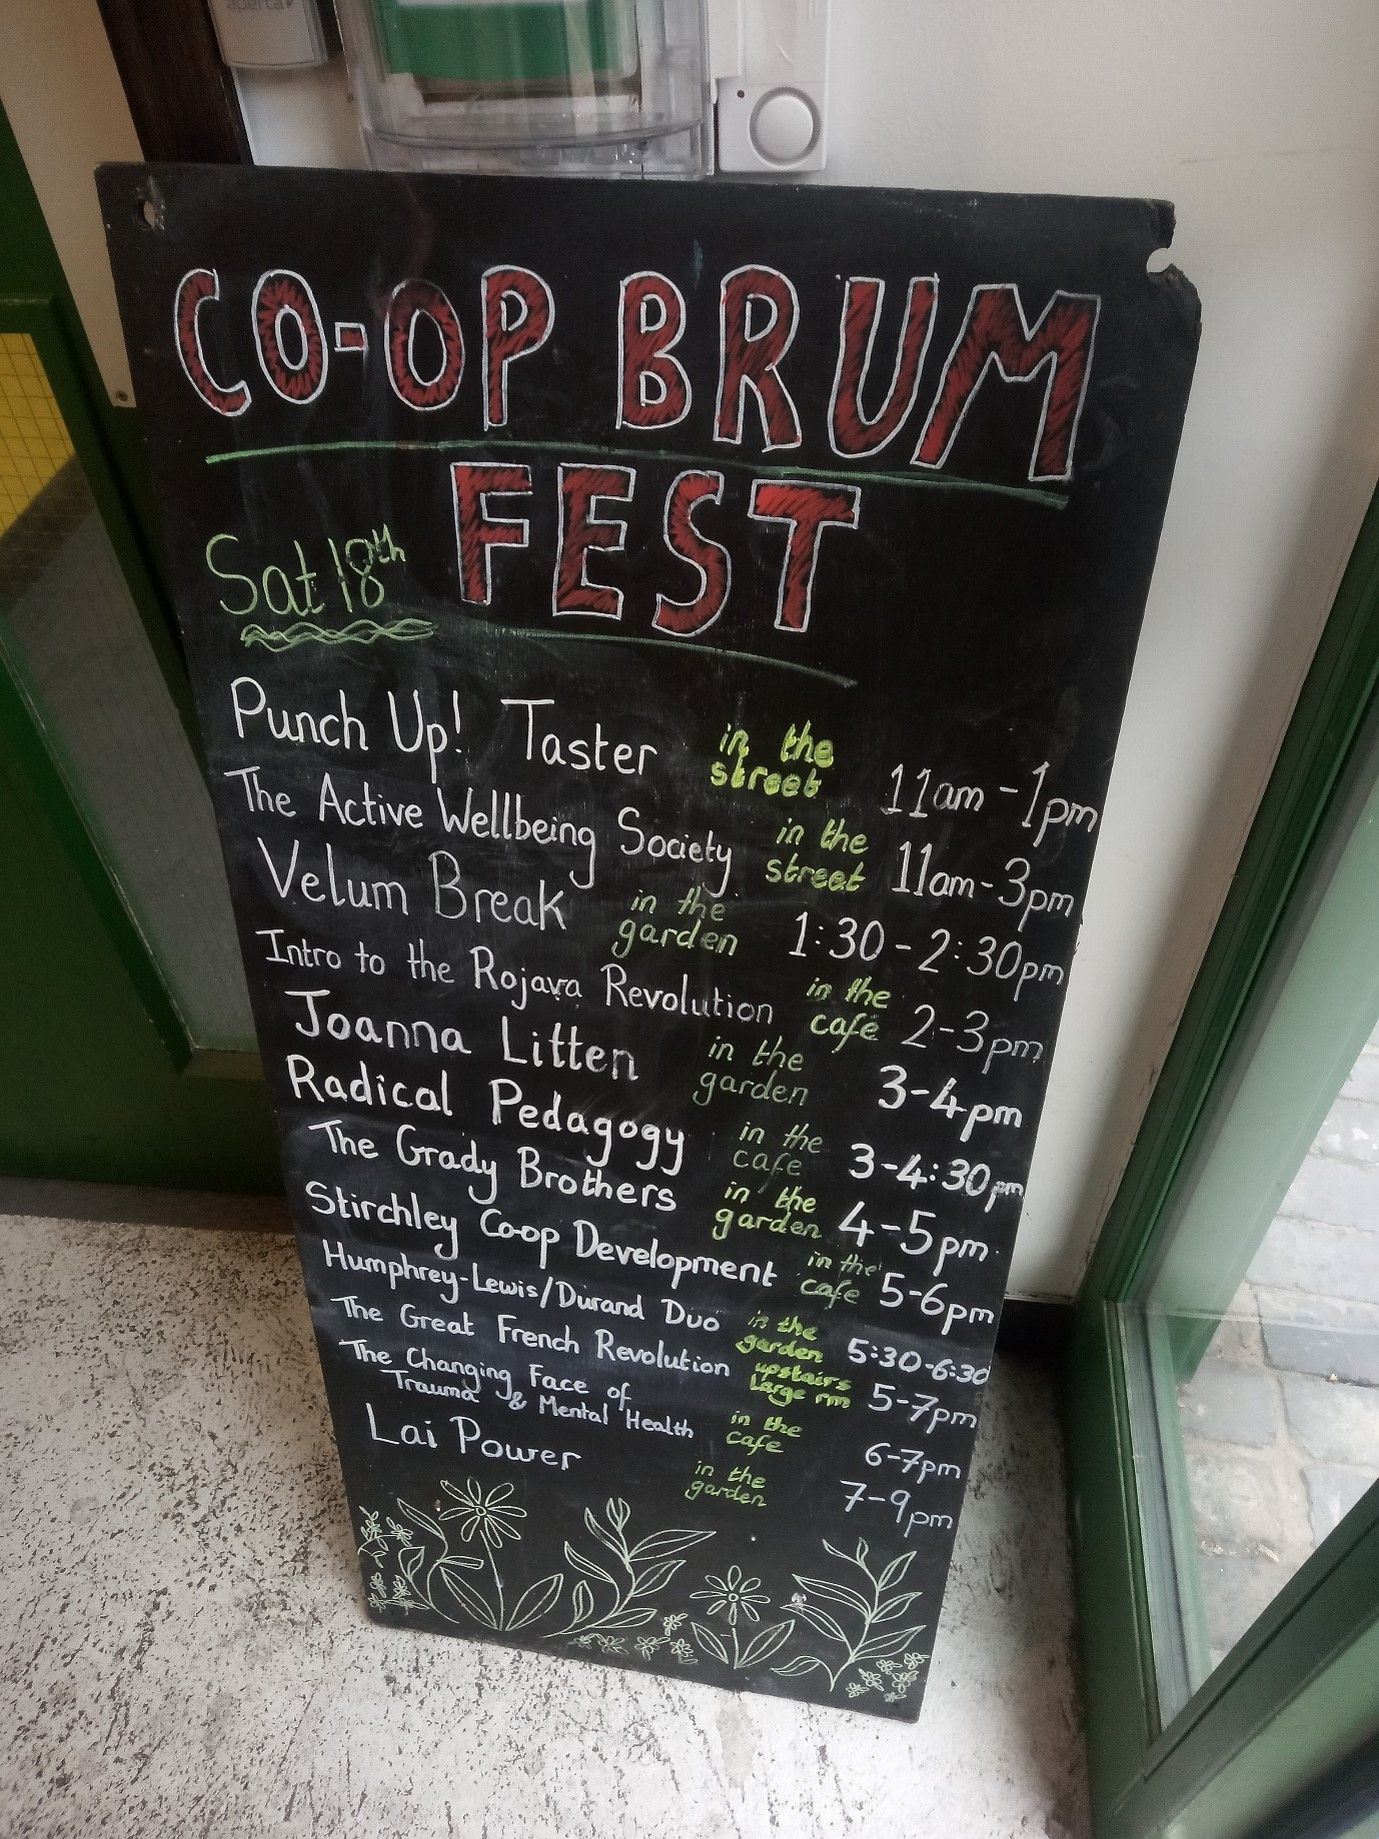 Brum Co-op Fest brings people together to celebrate co-operation